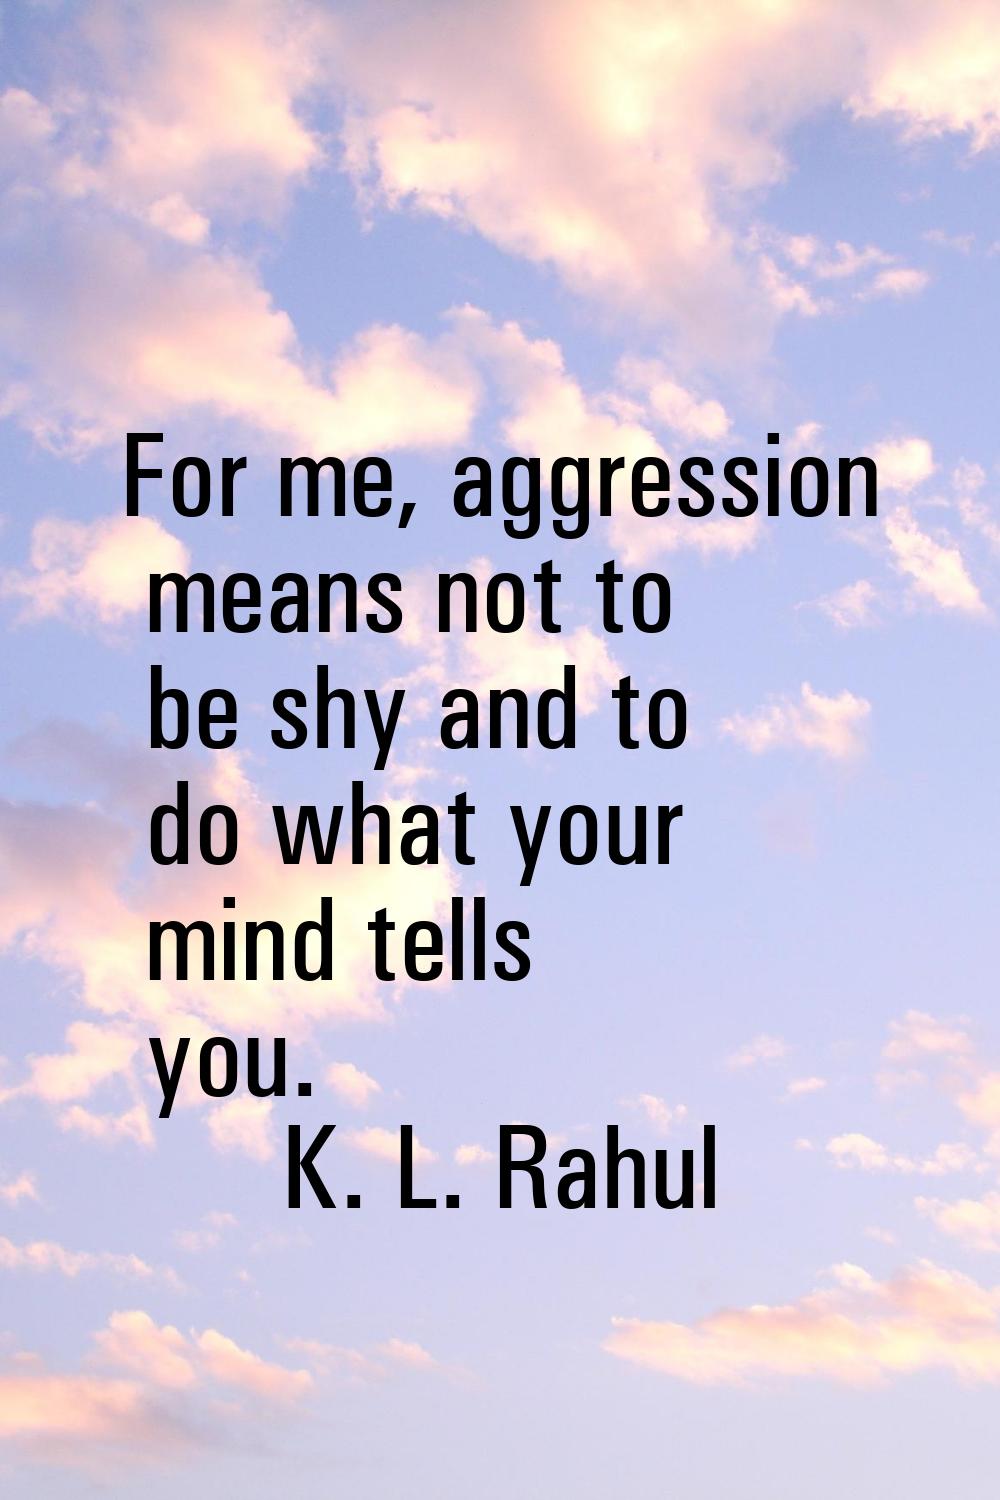 For me, aggression means not to be shy and to do what your mind tells you.